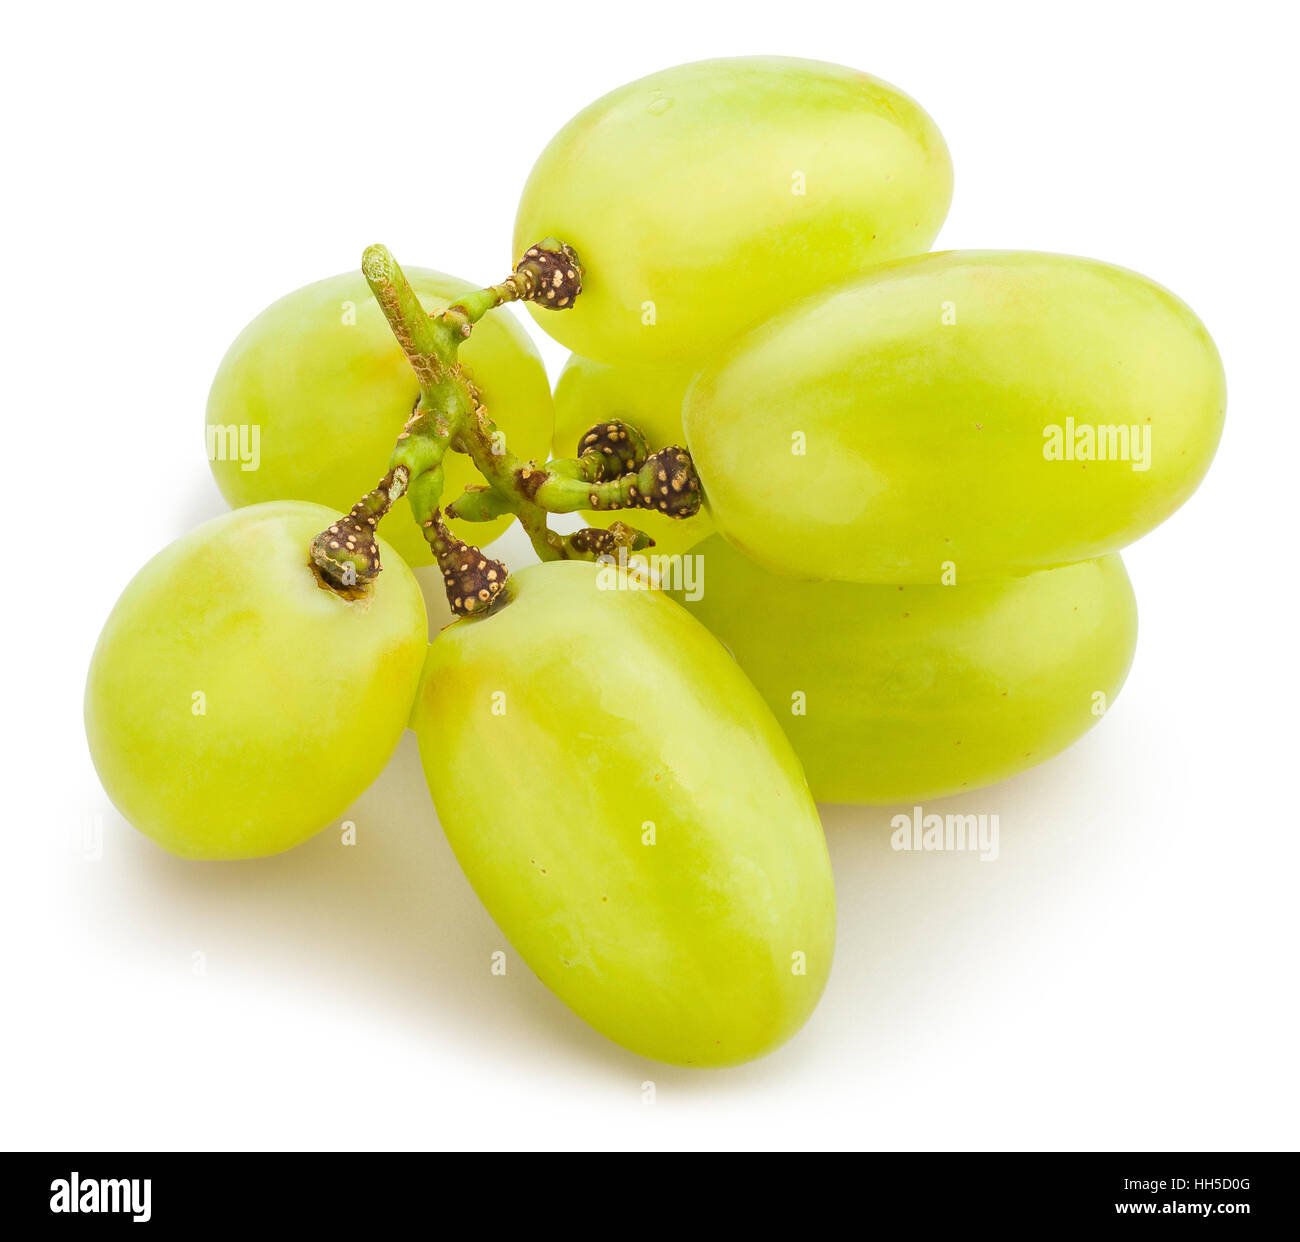 https://c8.alamy.com/comp/HH5D0G/white-grapes-isolated-HH5D0G.jpg